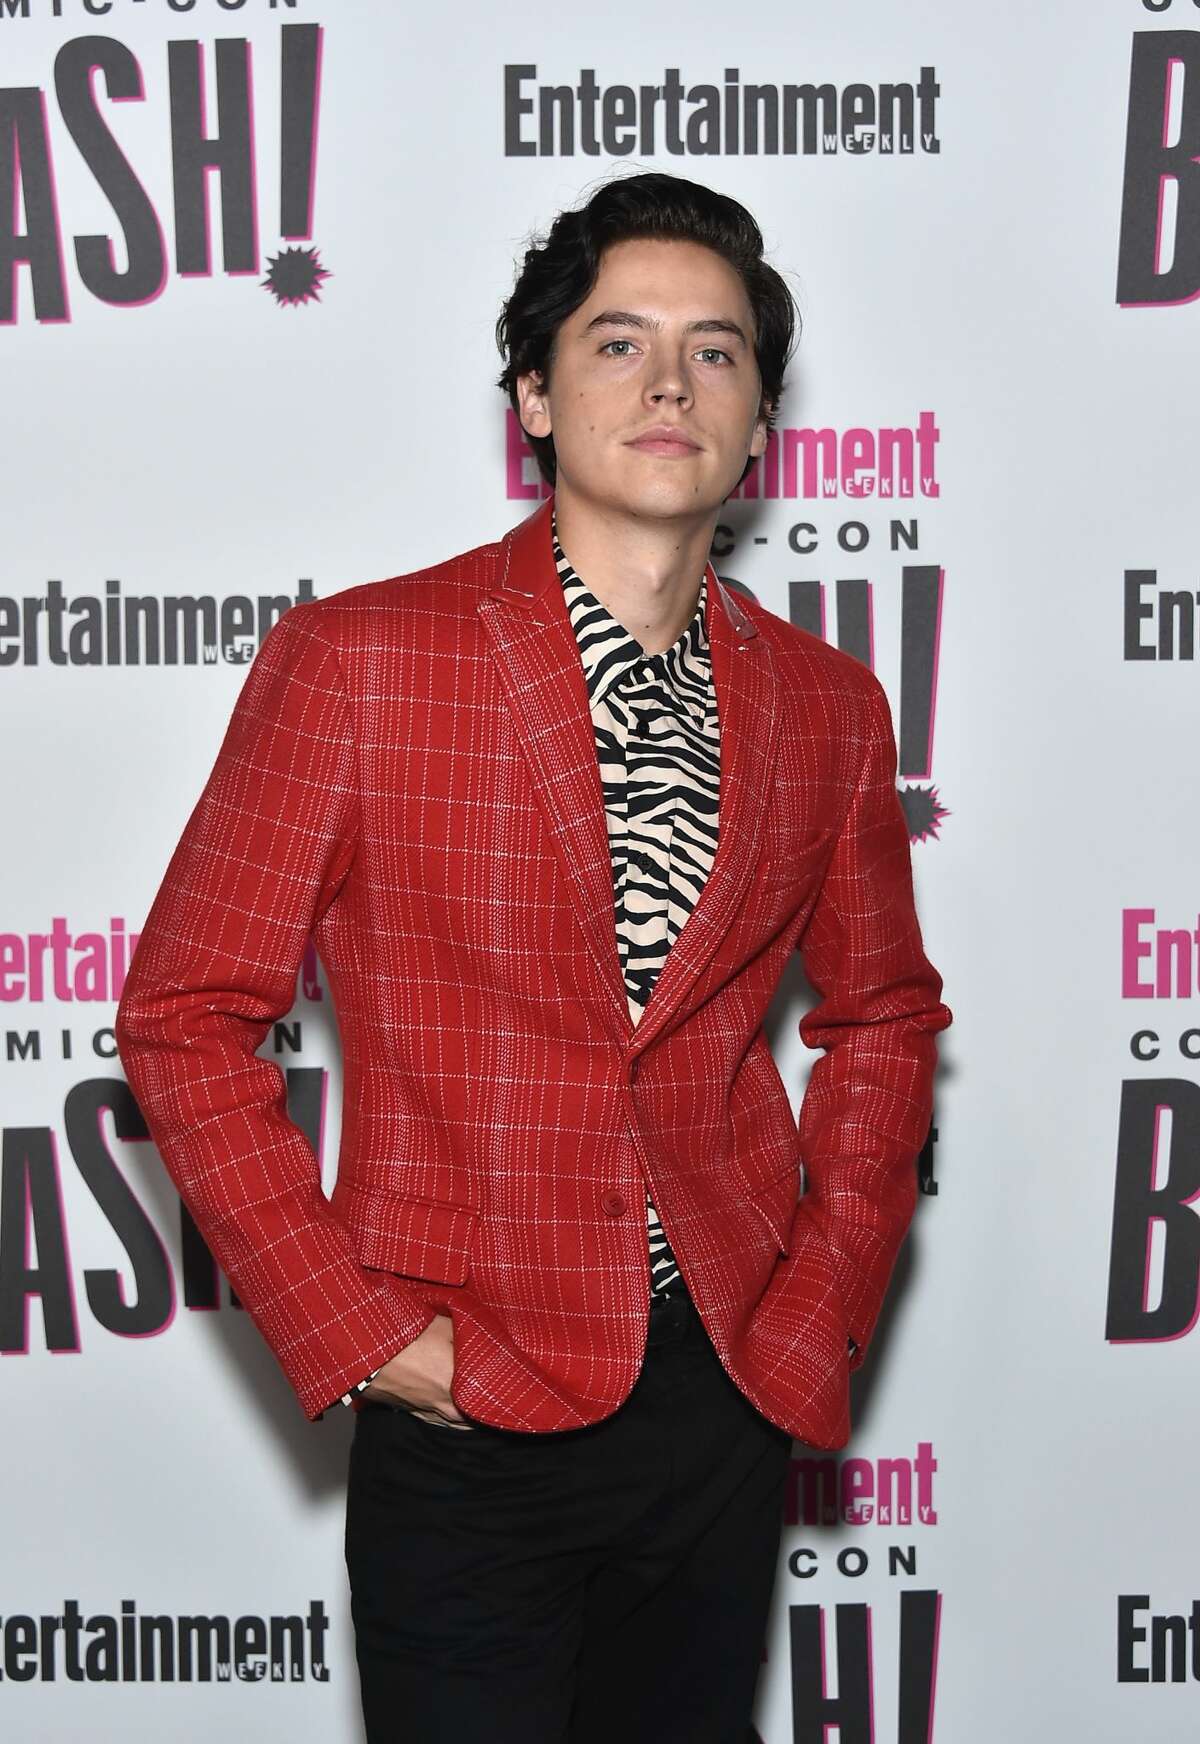 Alamo City Comic Con announced Wednesday evening that Sprouse will not be able attend the event.